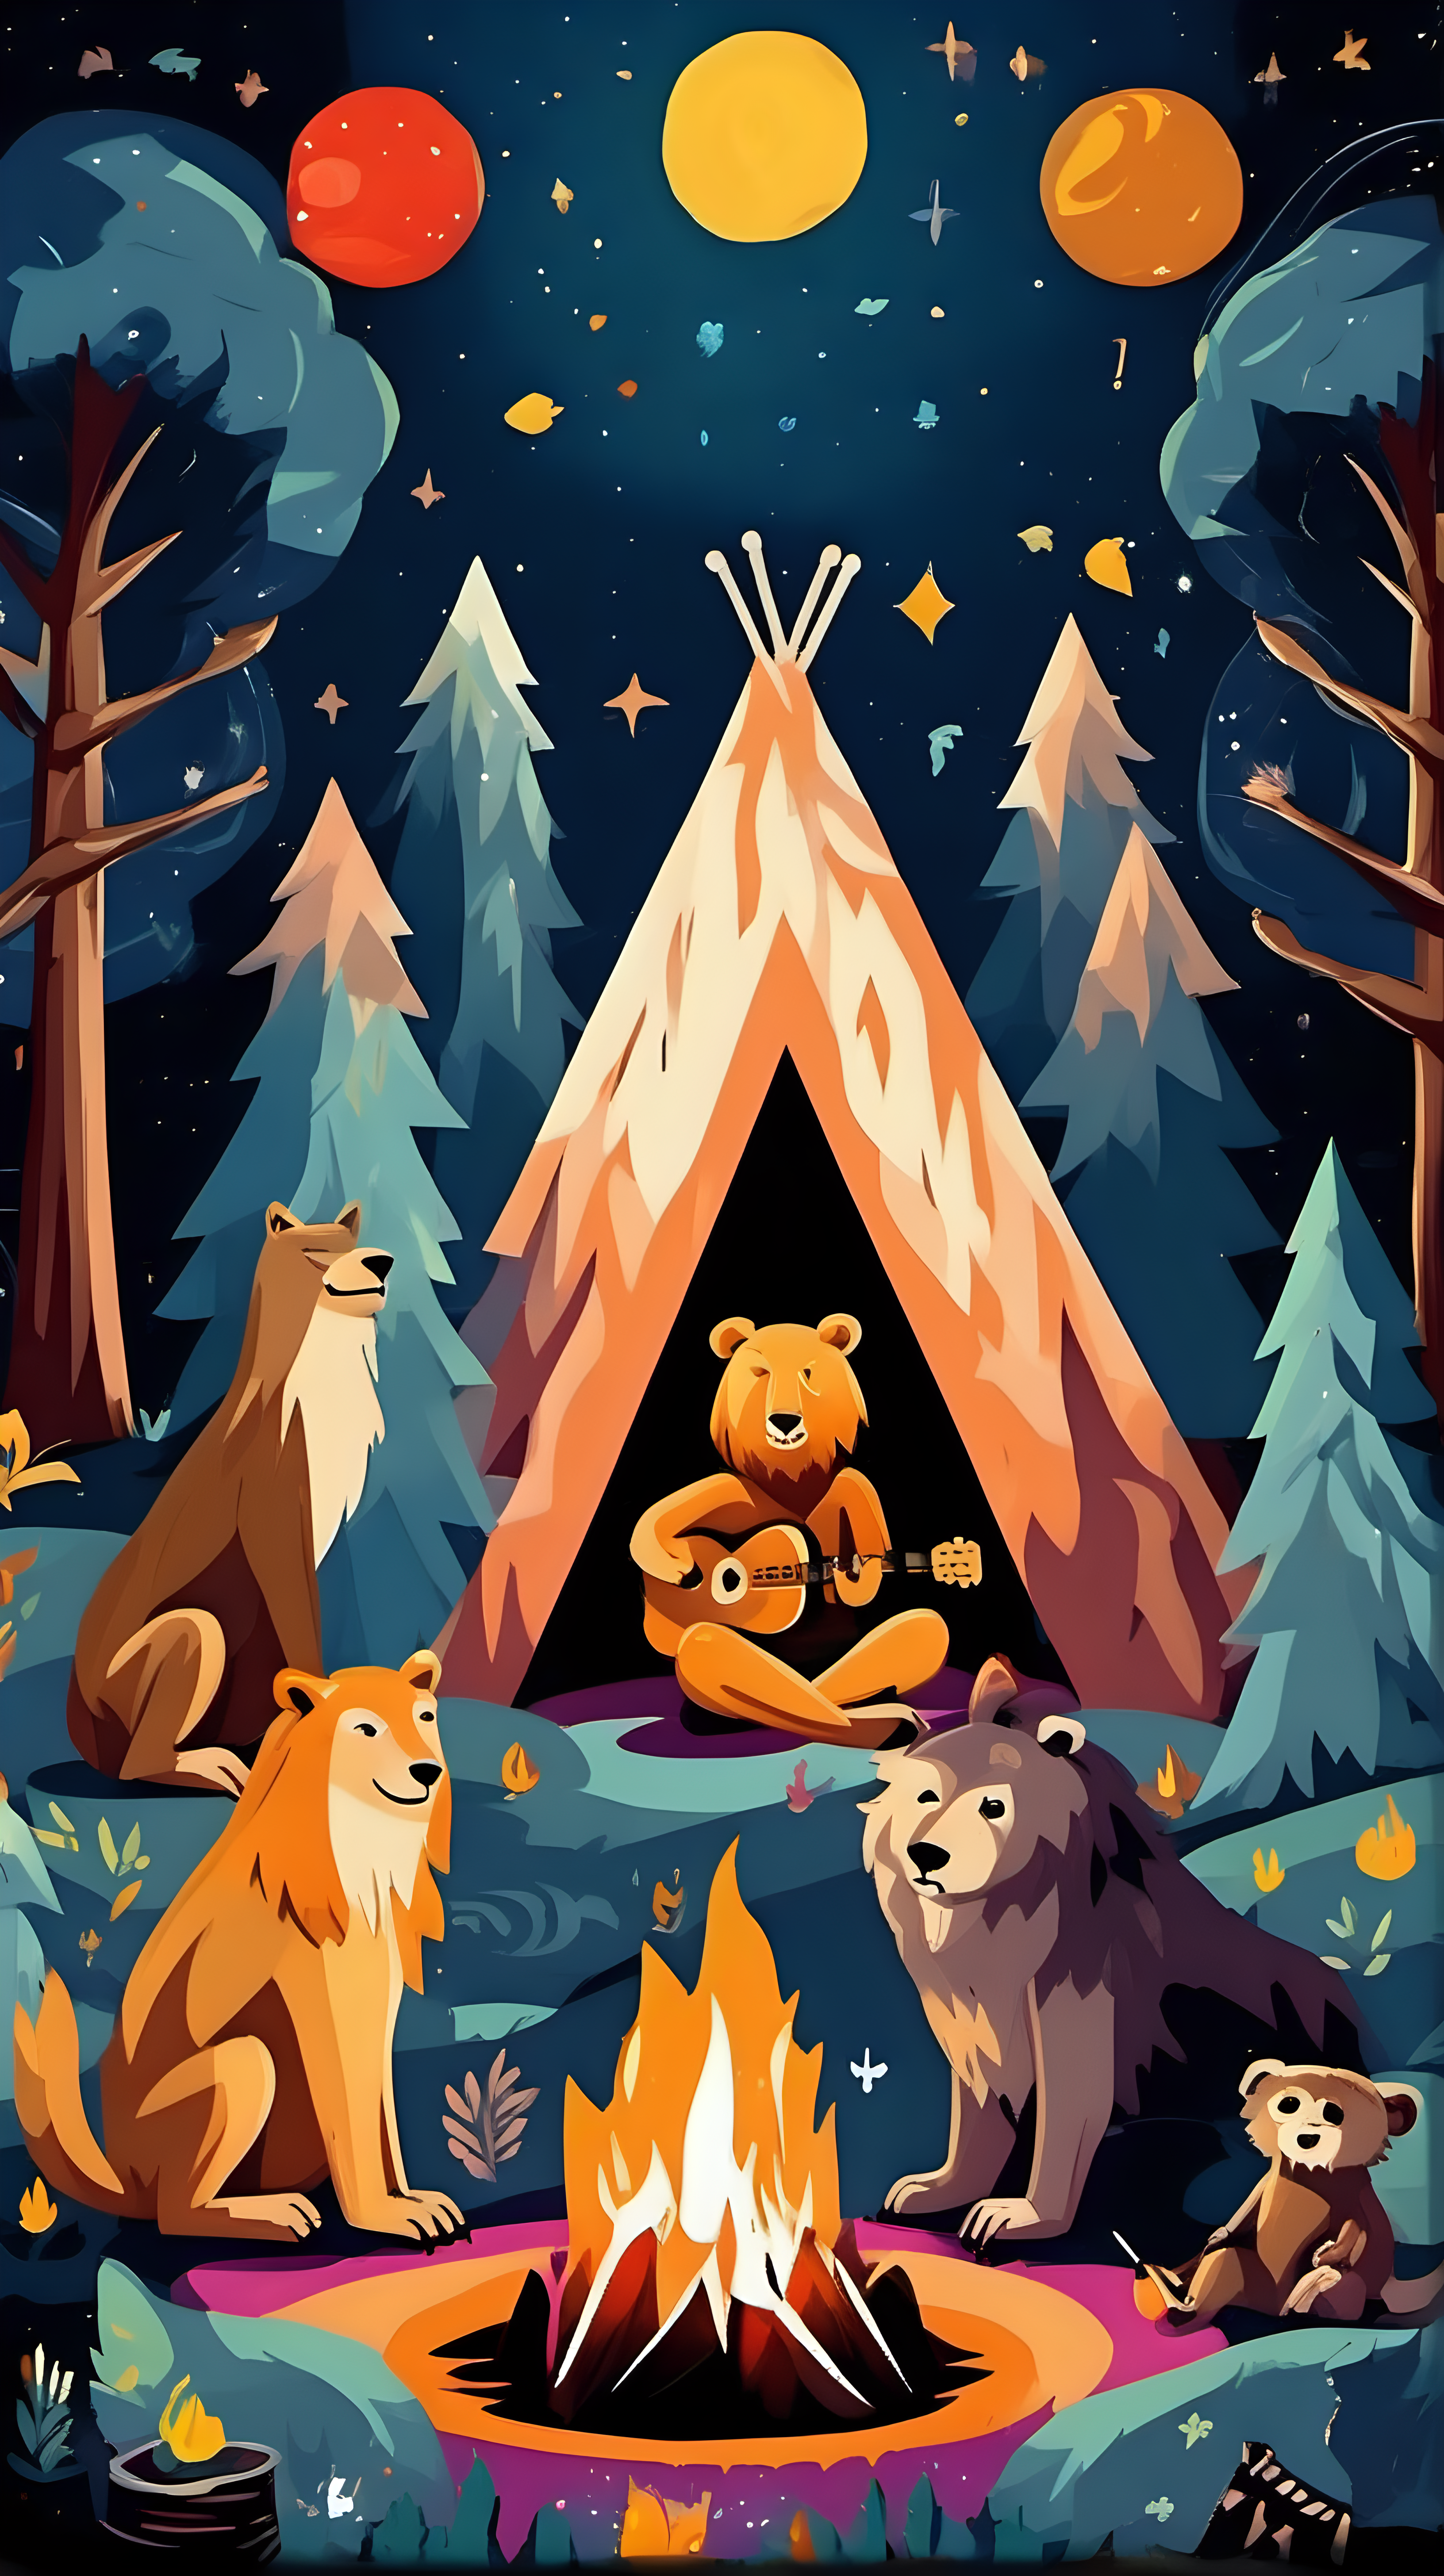 cosmic campfire with animals playing music lion bear